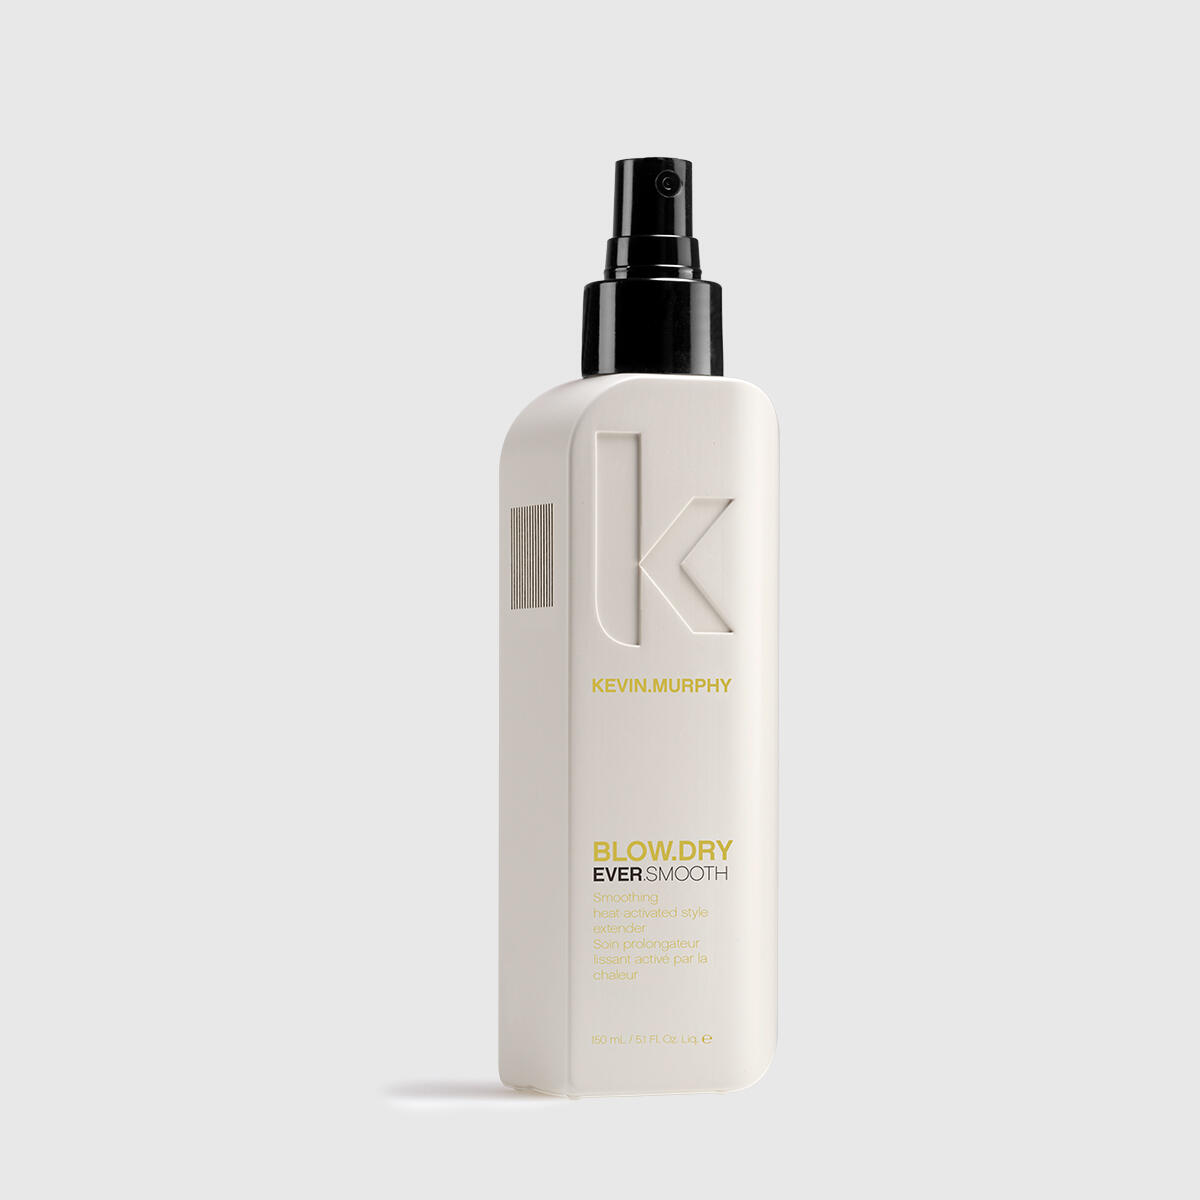 Kevin Murphy Blow Dry Ever Smooth null